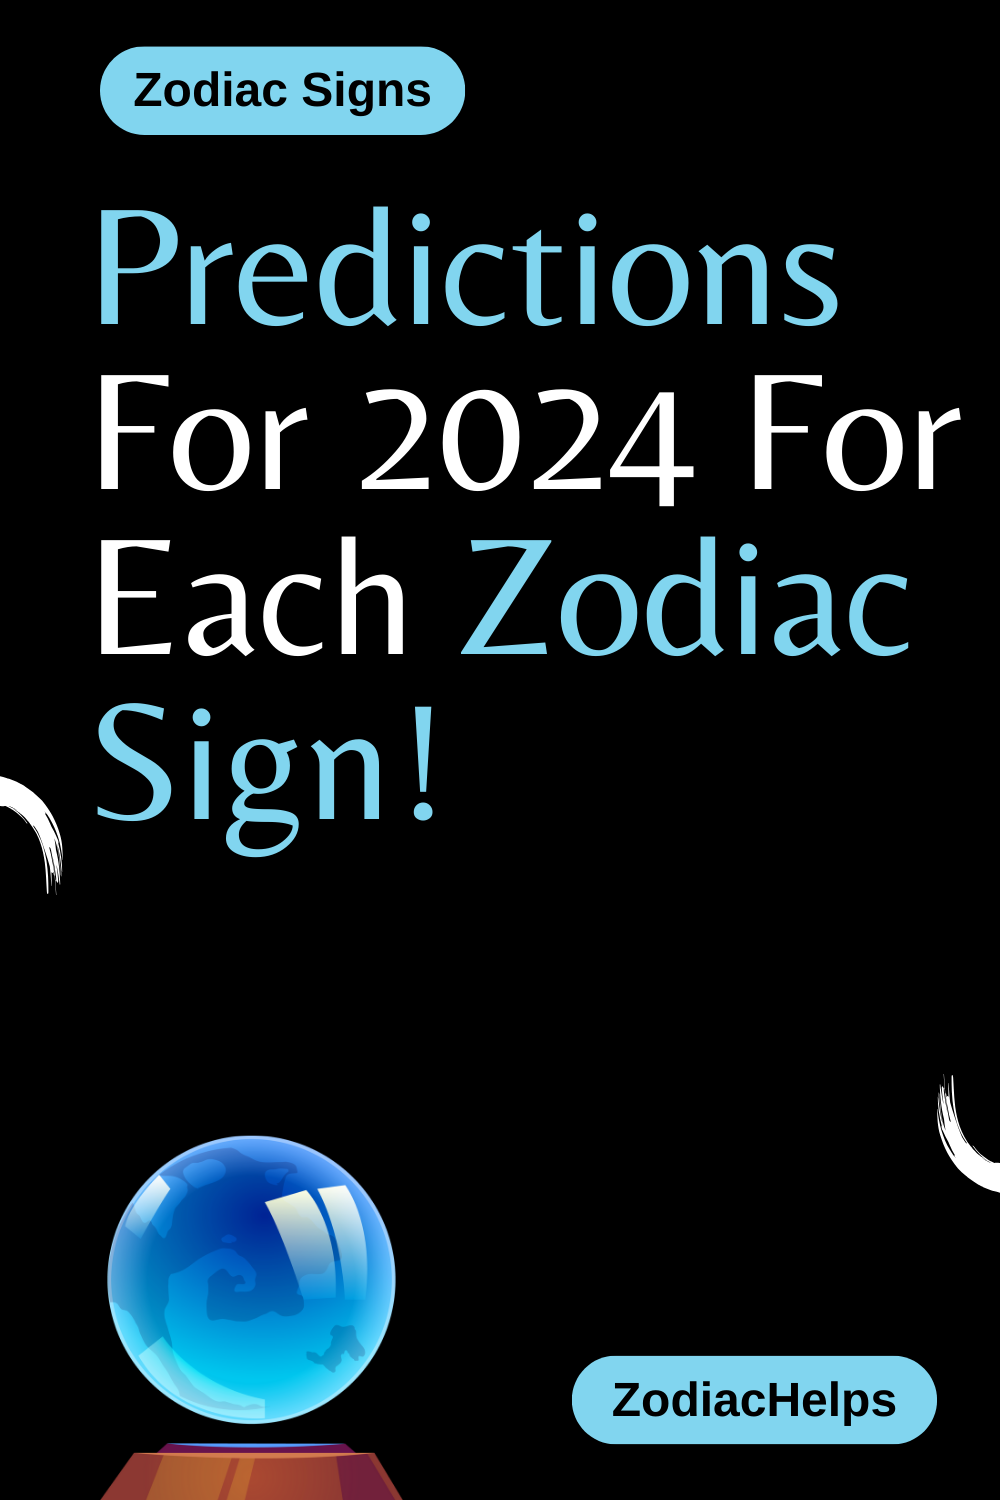 Predictions For 2024 For Each Zodiac Sign!